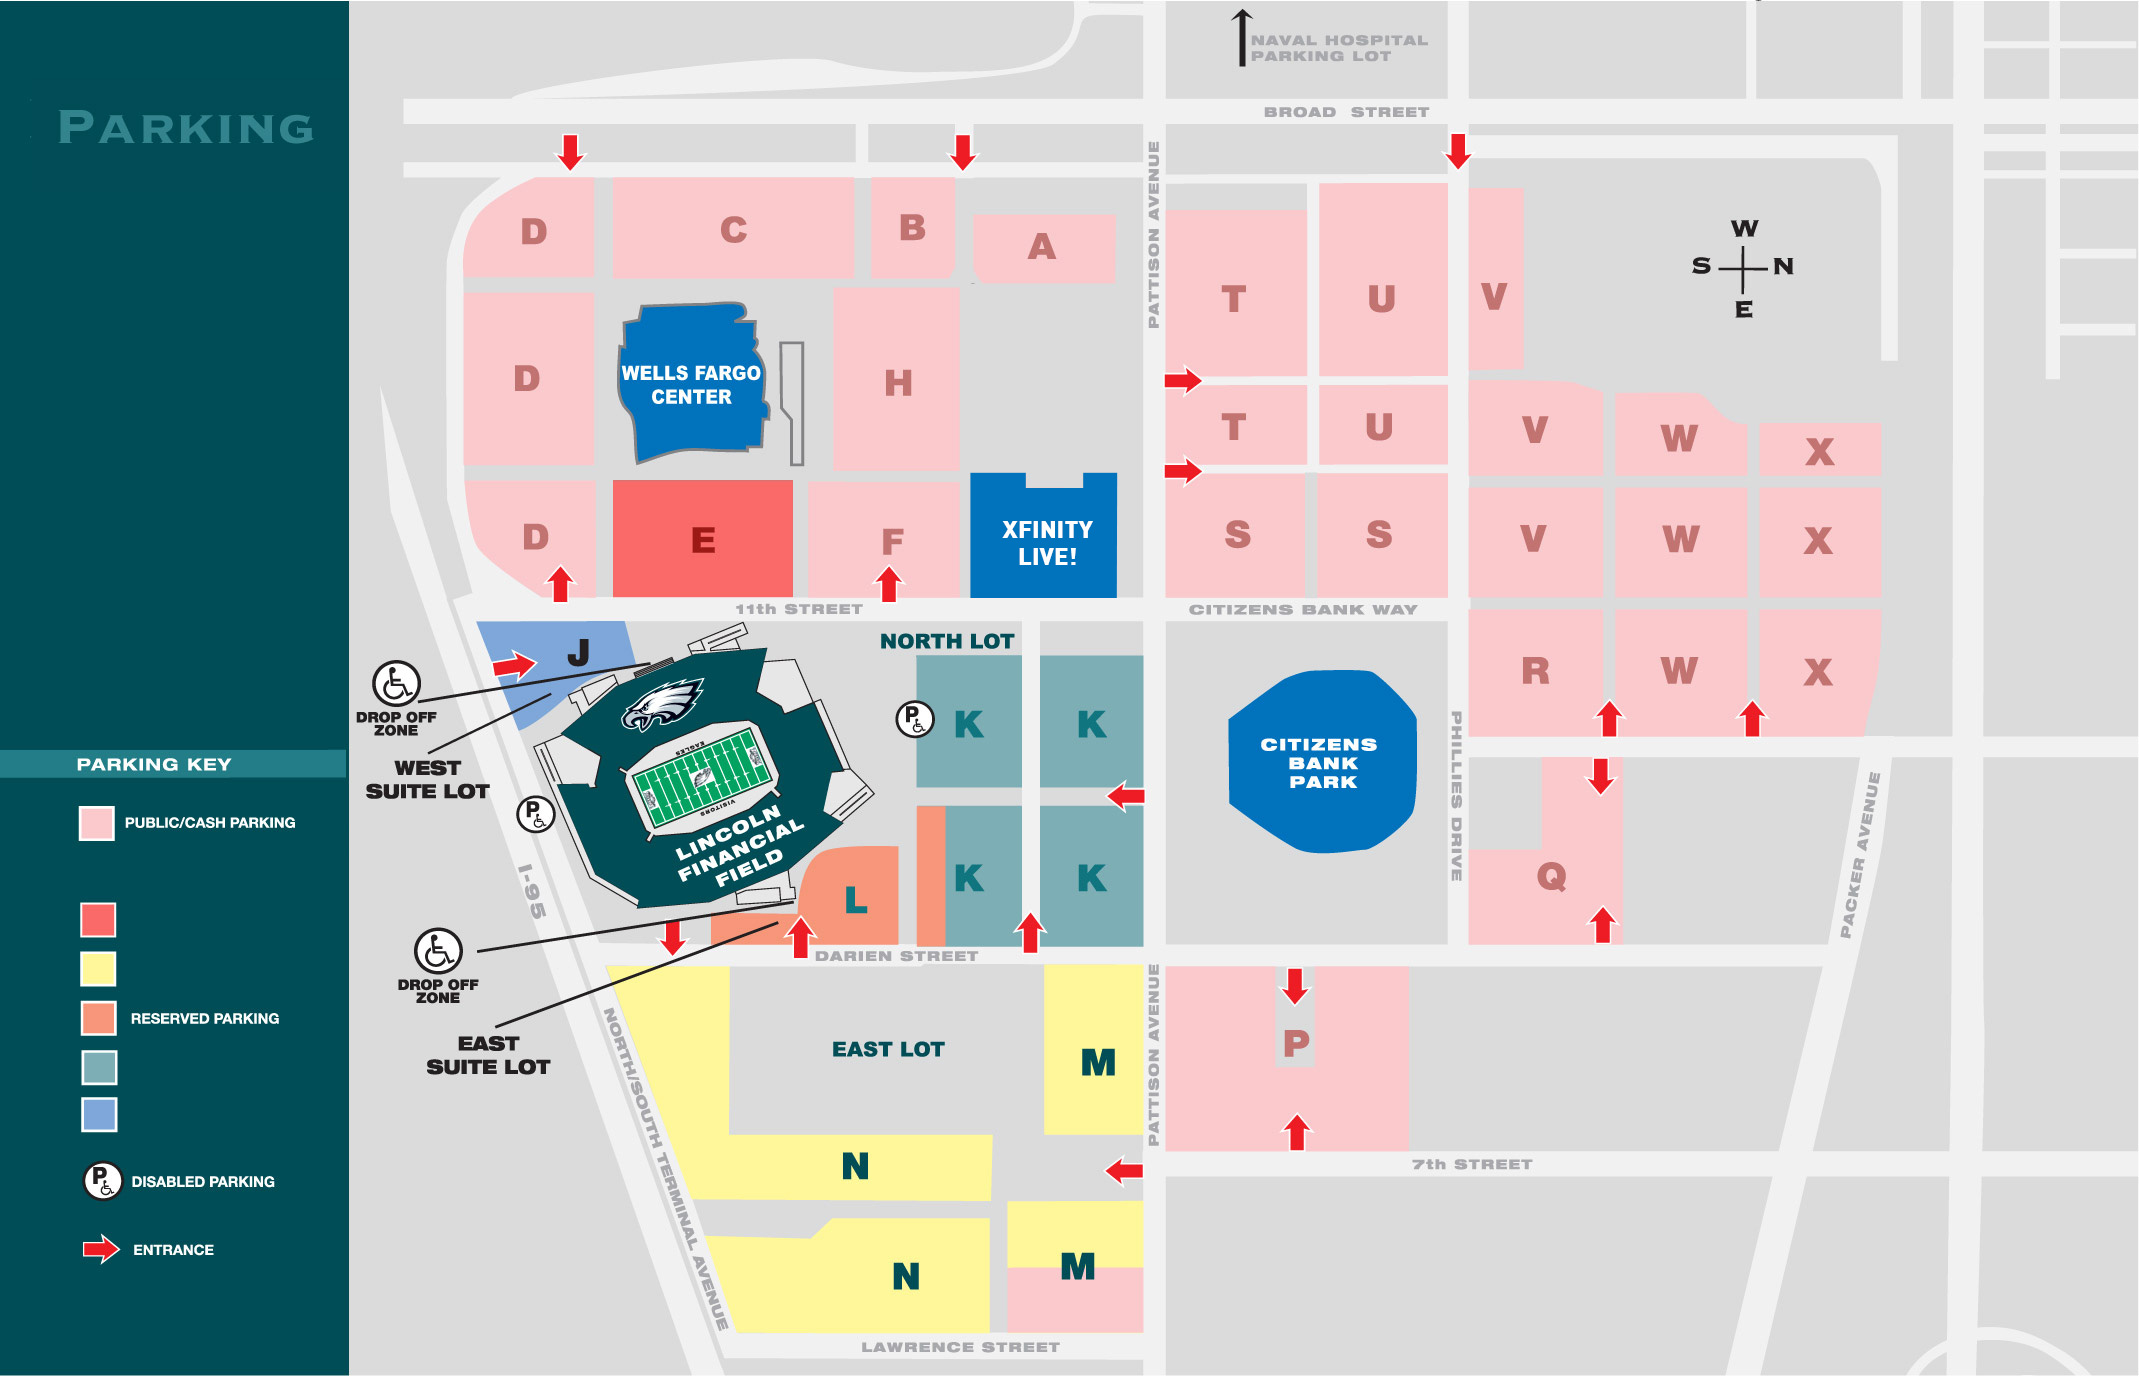 Philadelphia Eagles Parking Lots Map at Lincoln Financial Field